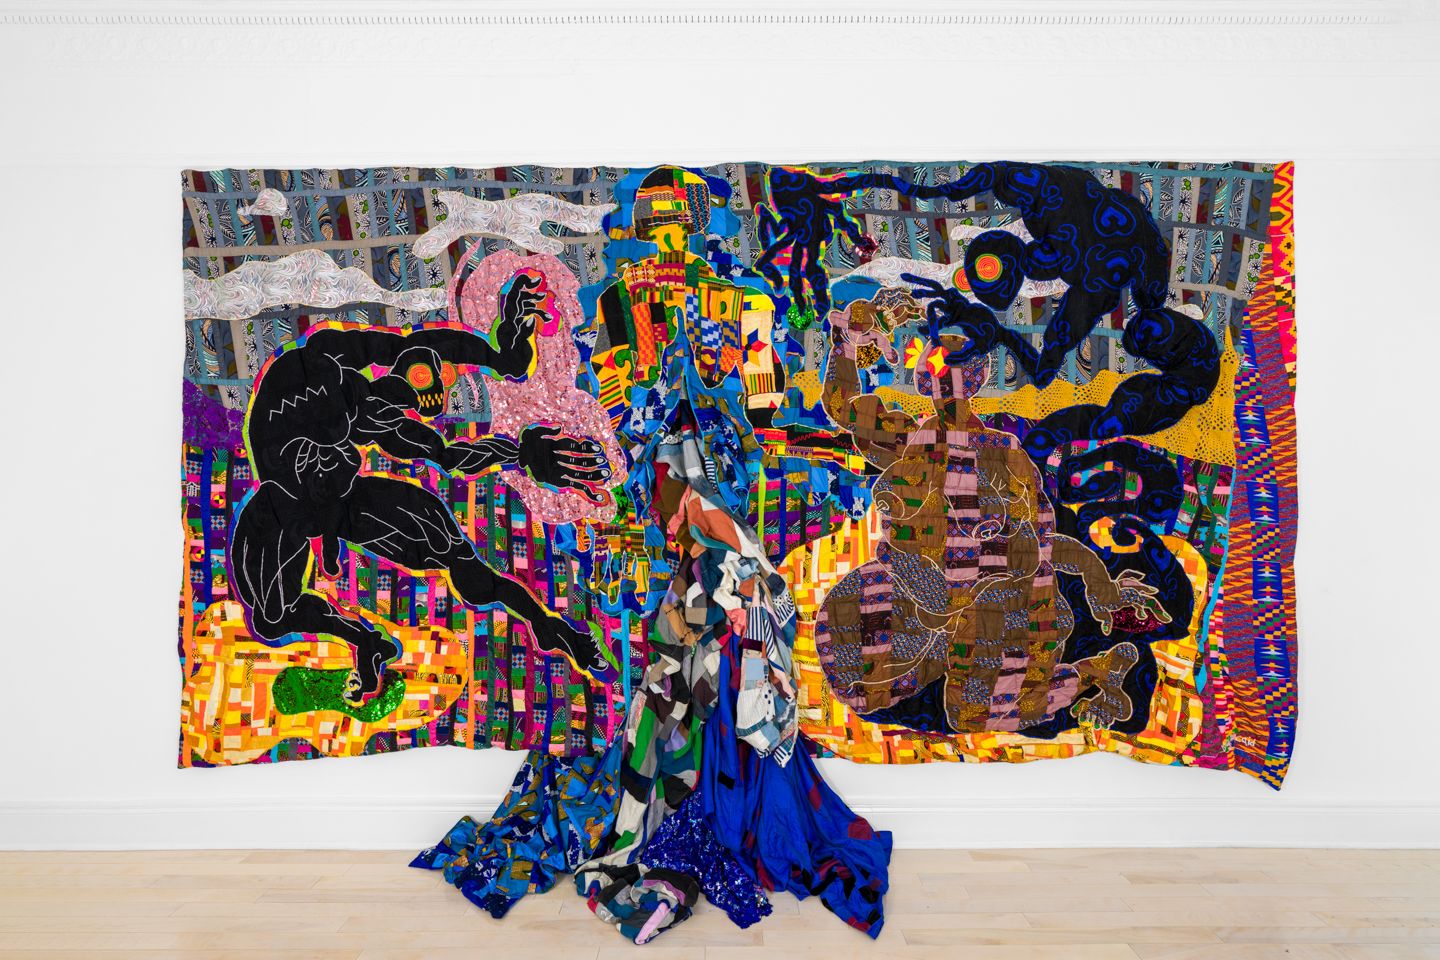 Basil Kincaid's 104 x 204 x 12 in multi-layered quilt called "The River" incorporates materials from 2017 to 2022. Credit: Venus Over Manhattan.